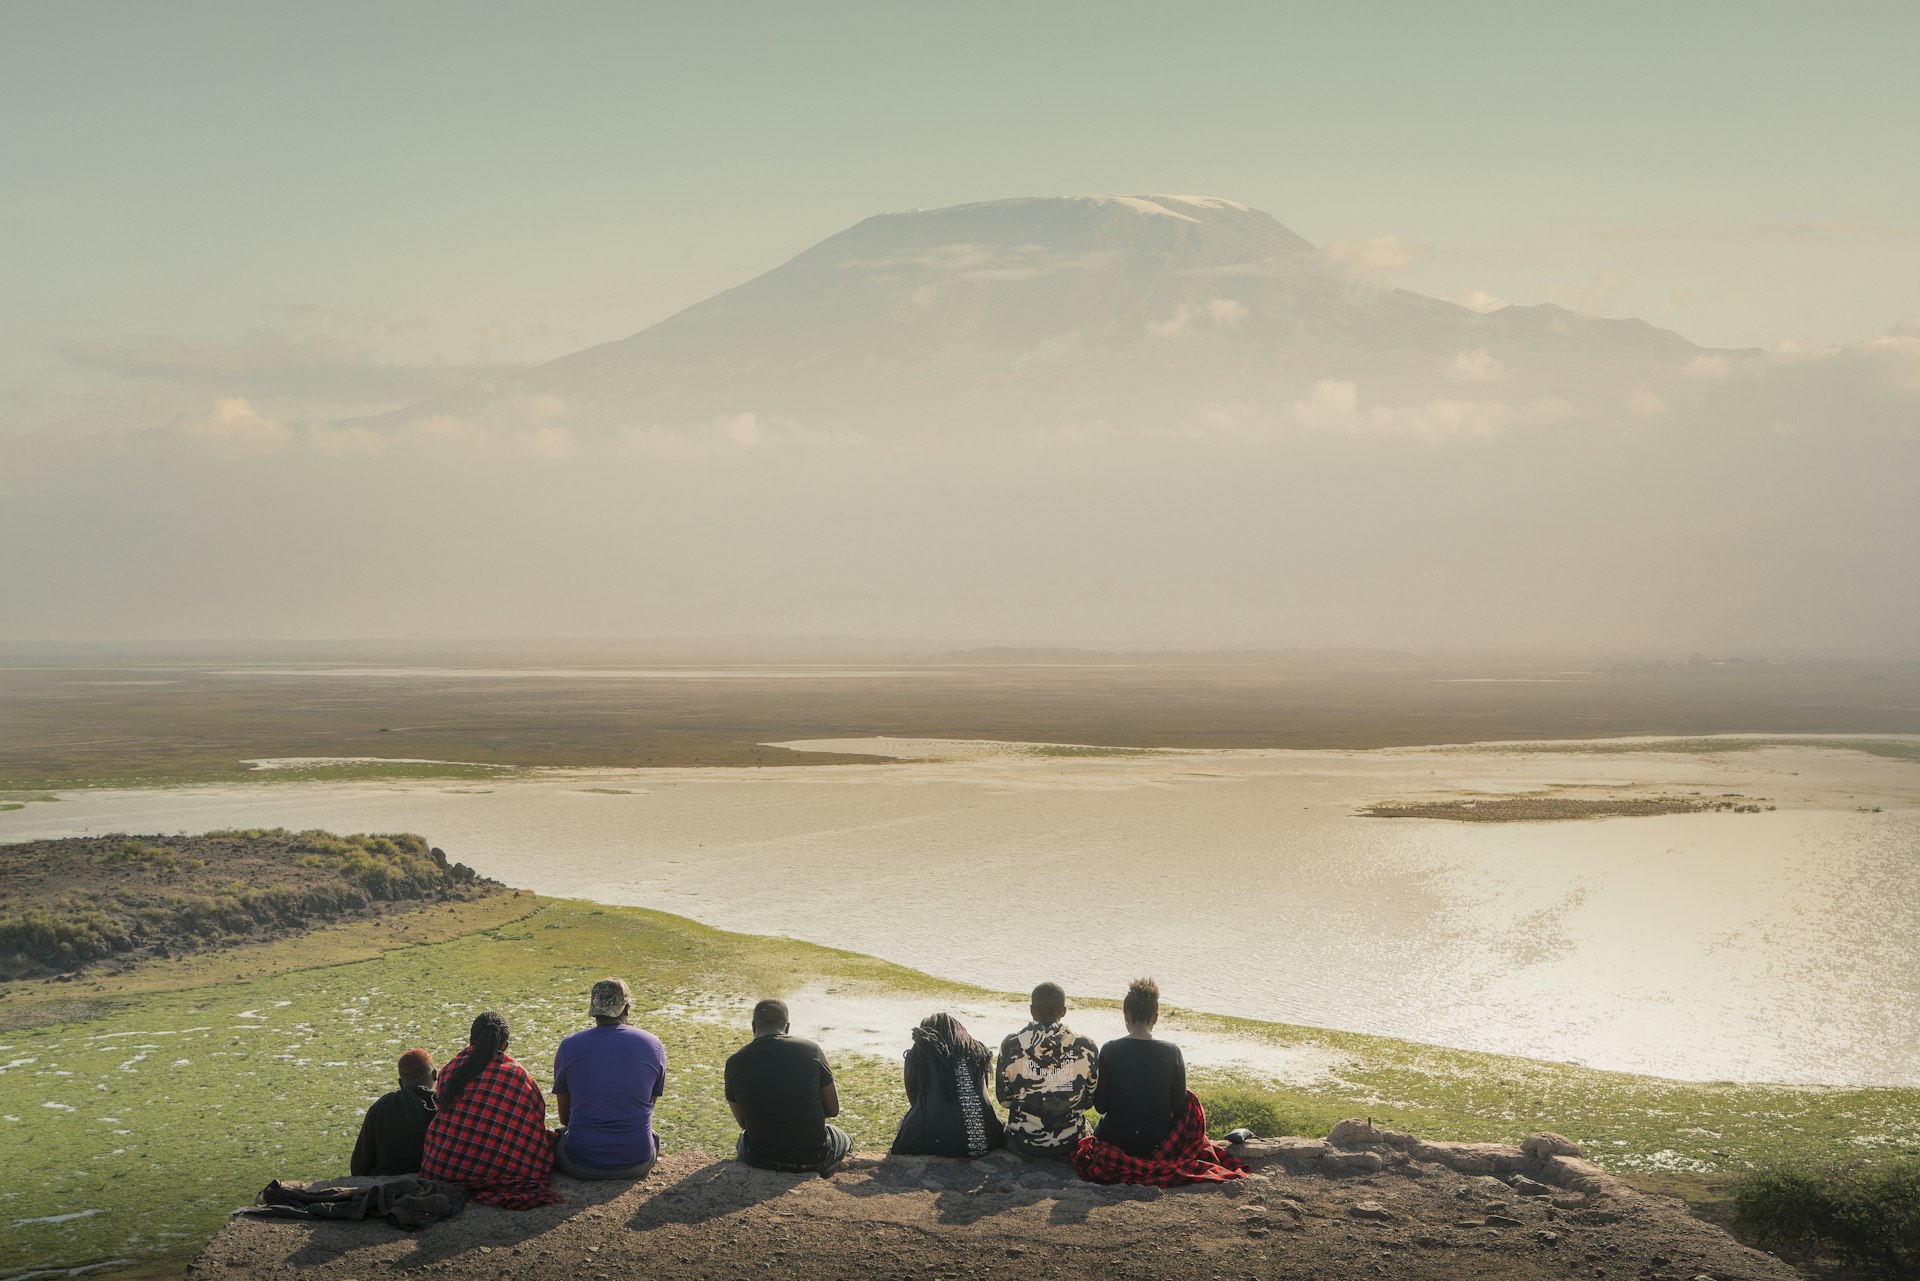 A group of tourists watching sunset over Mount Kilimanjaro 